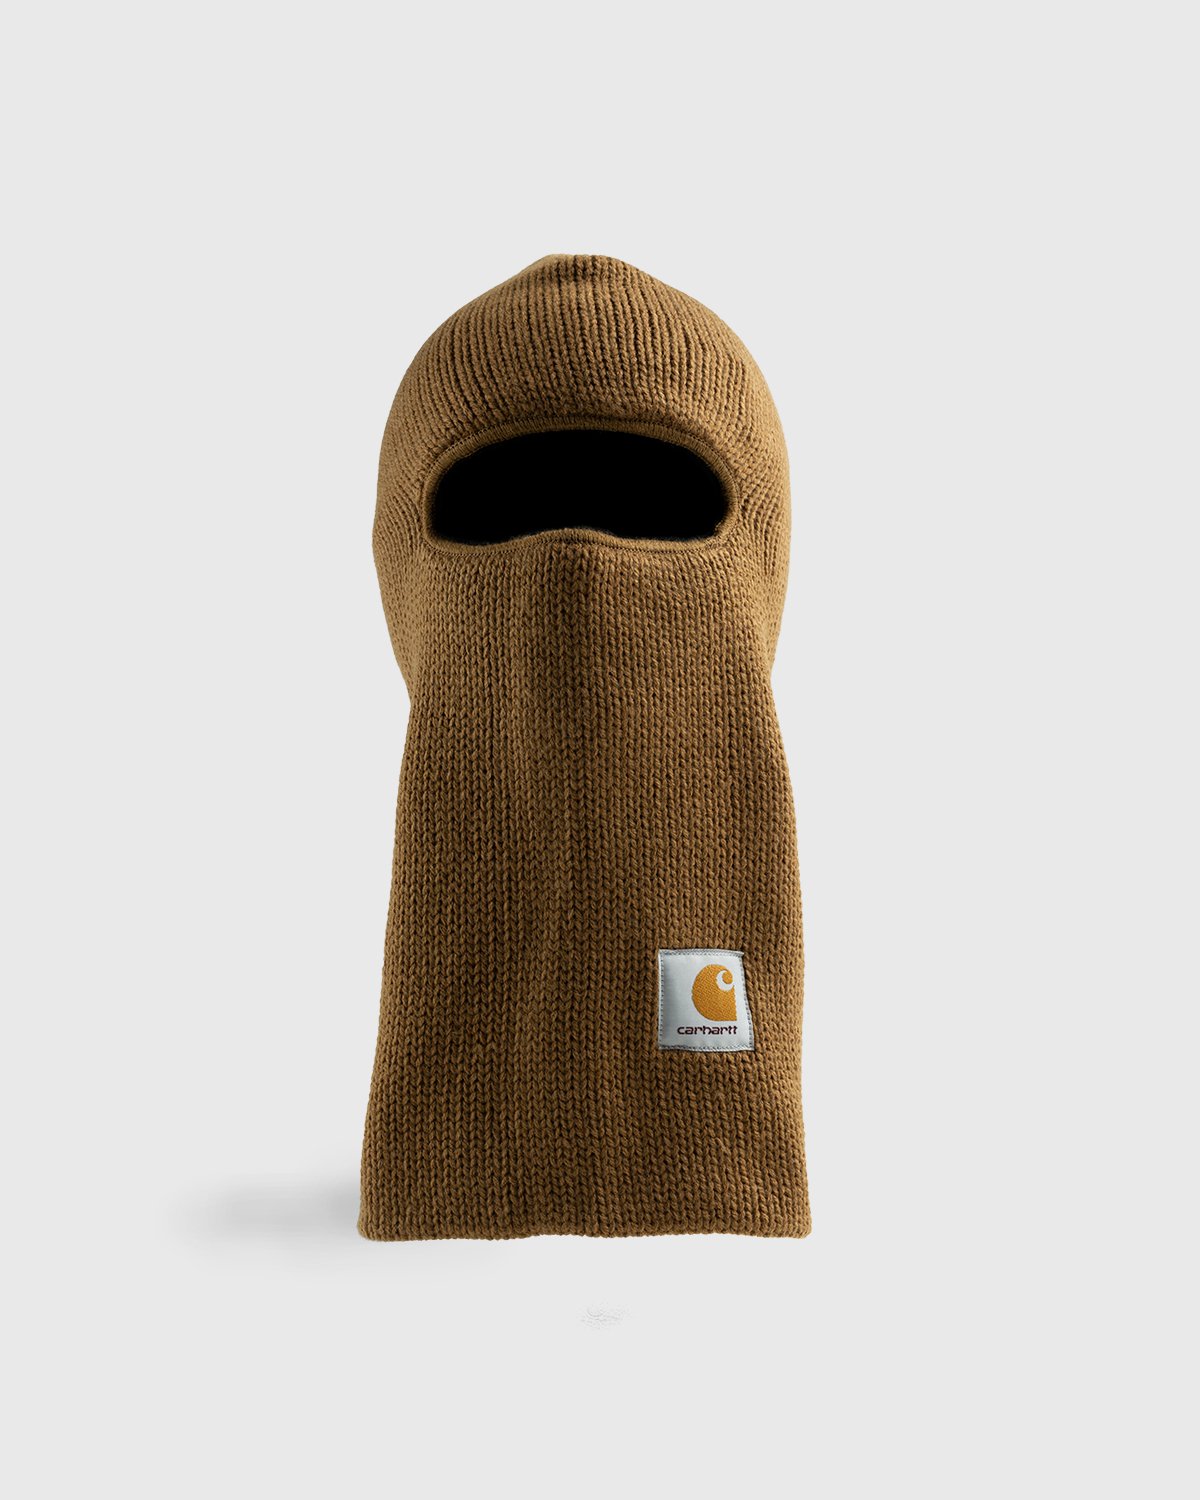 Carhartt WIP - Storm Mask Hamilton Brown - Accessories - Brown - Image 1